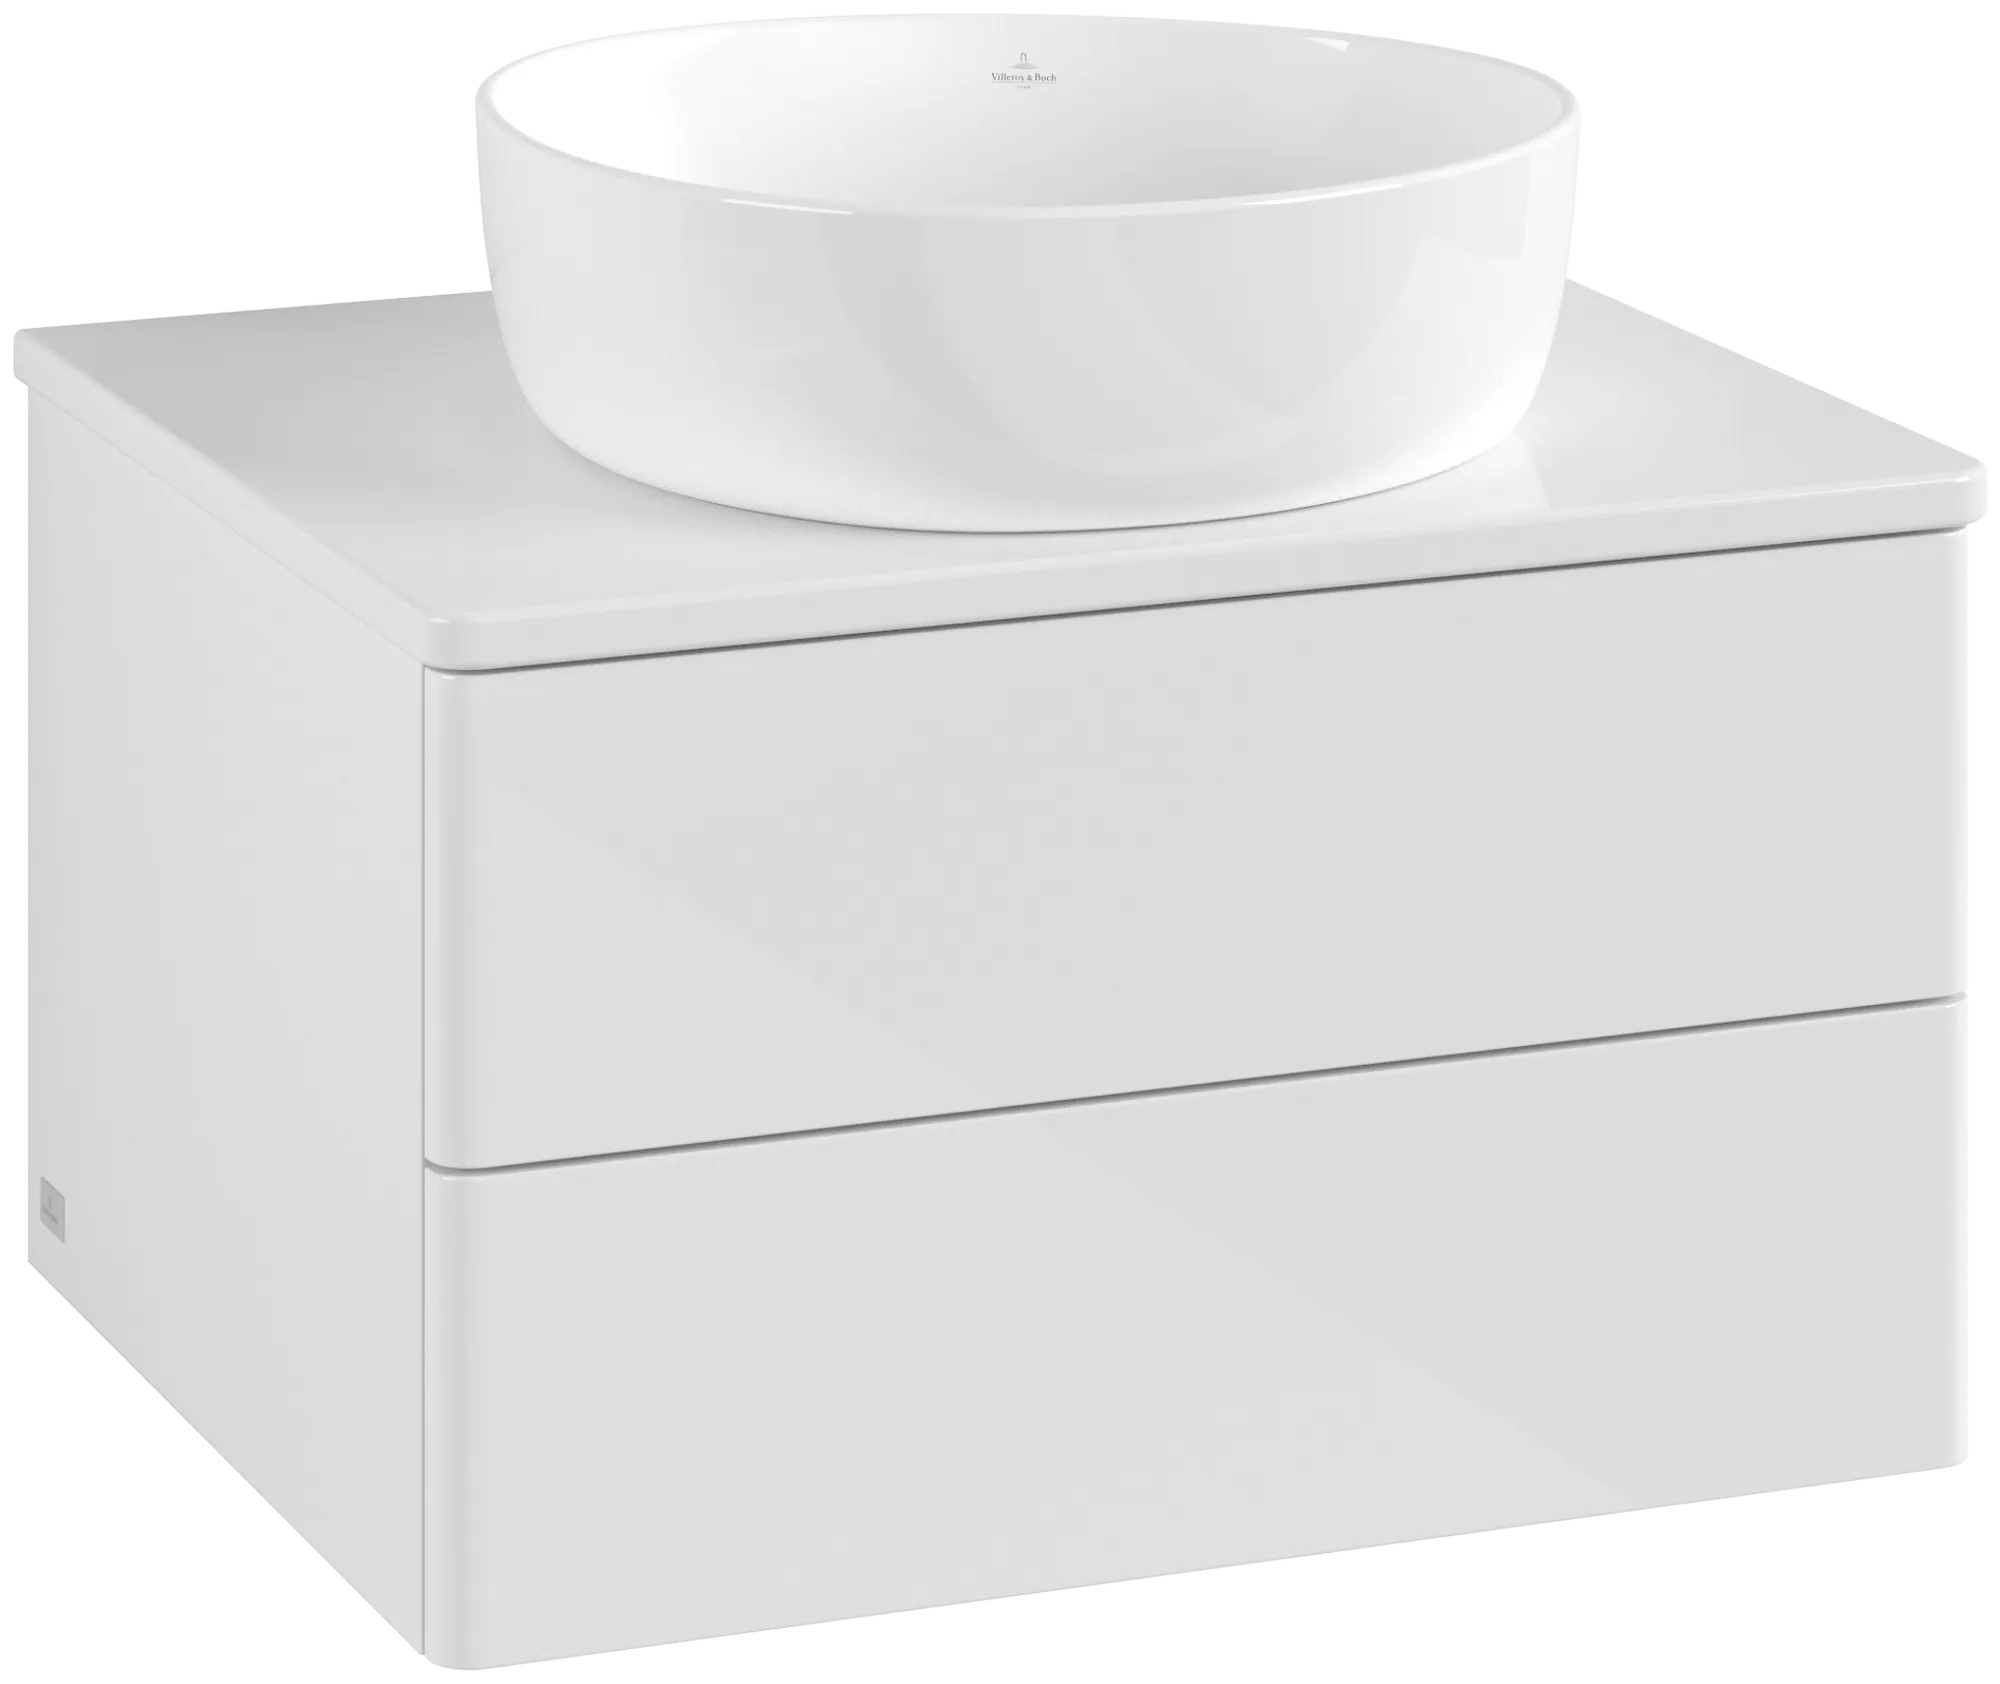 Picture of VILLEROY BOCH Antao Vanity unit, with lighting, 2 pull-out compartments, 600 x 360 x 500 mm, Front without structure, Glossy White Lacquer / Glossy White Lacquer #L18050GF